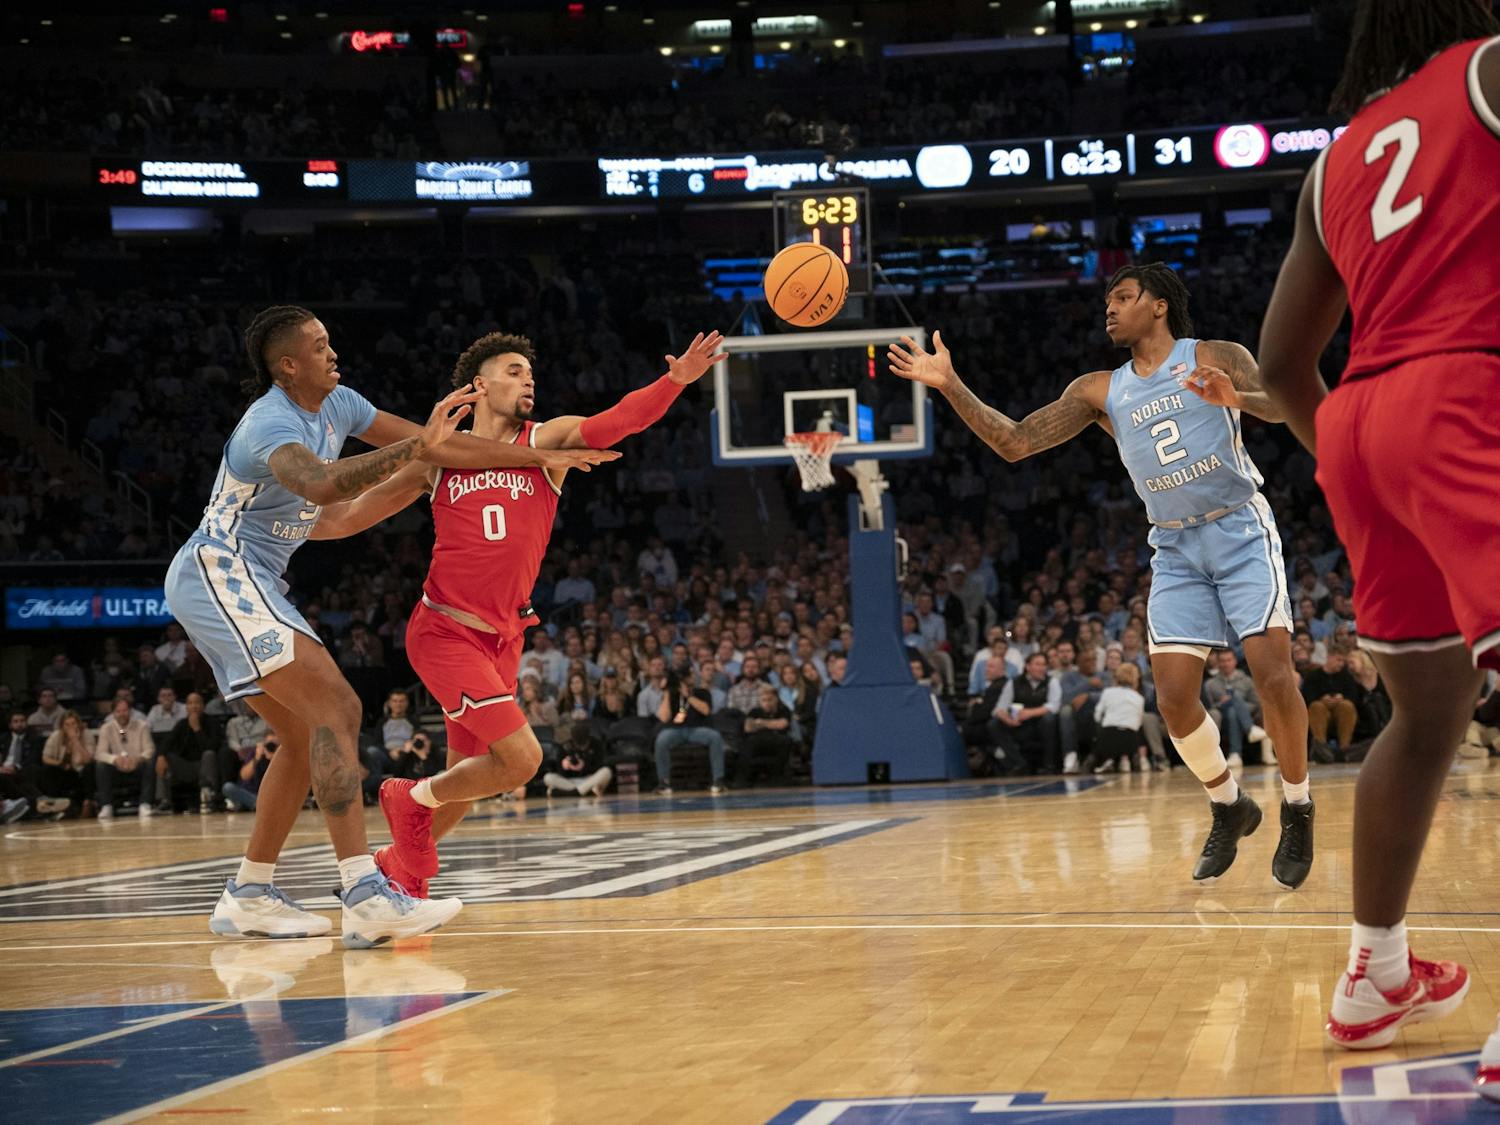 UNC senior forward/center Armando Bacot (5) tries to maintain UNC's possession passing the ball to UNC junior guard Caleb Love (2) during the men's basketball game against Ohio State at Madison Square Garden on Saturday, Dec. 17, 2022. UNC beat Ohio State 89-84.